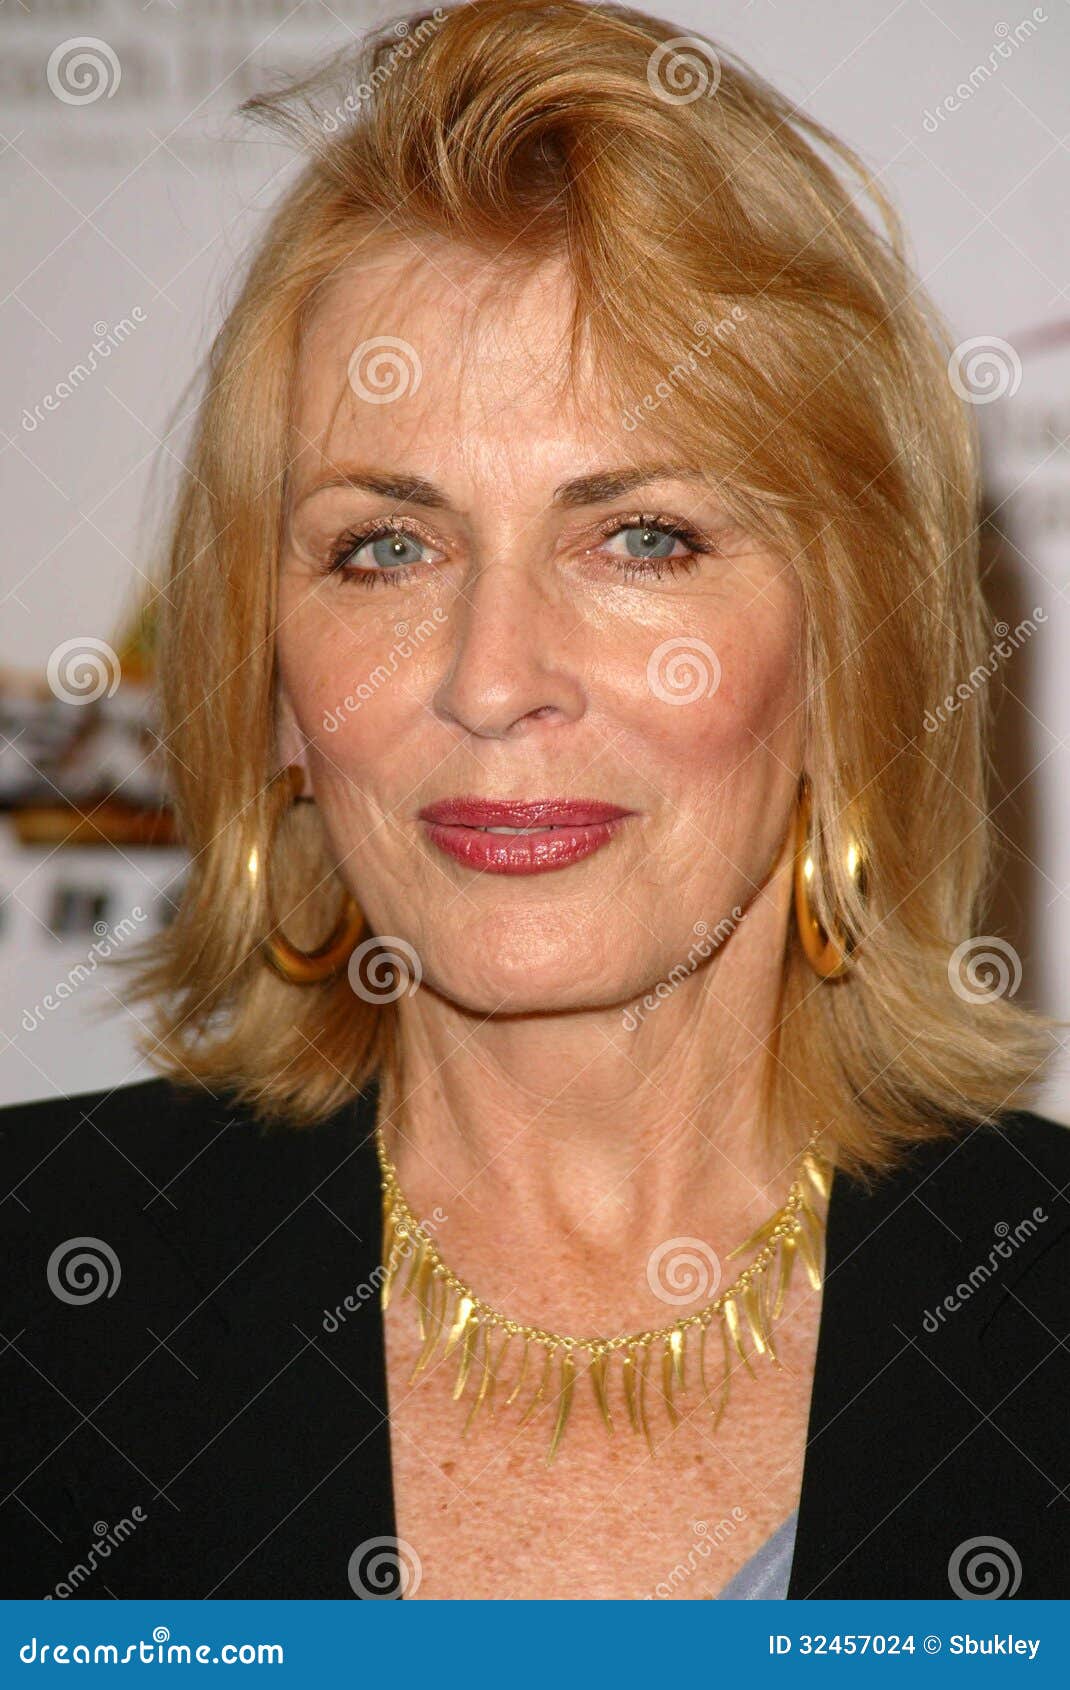 Joanna Cassidy Editorial Stock Image - Image: 32457024 - joanna-cassidy-rd-annual-runway-life-benefiting-st-jude-children-s-research-hospital-beverly-hilton-beverly-hills-ca-32457024